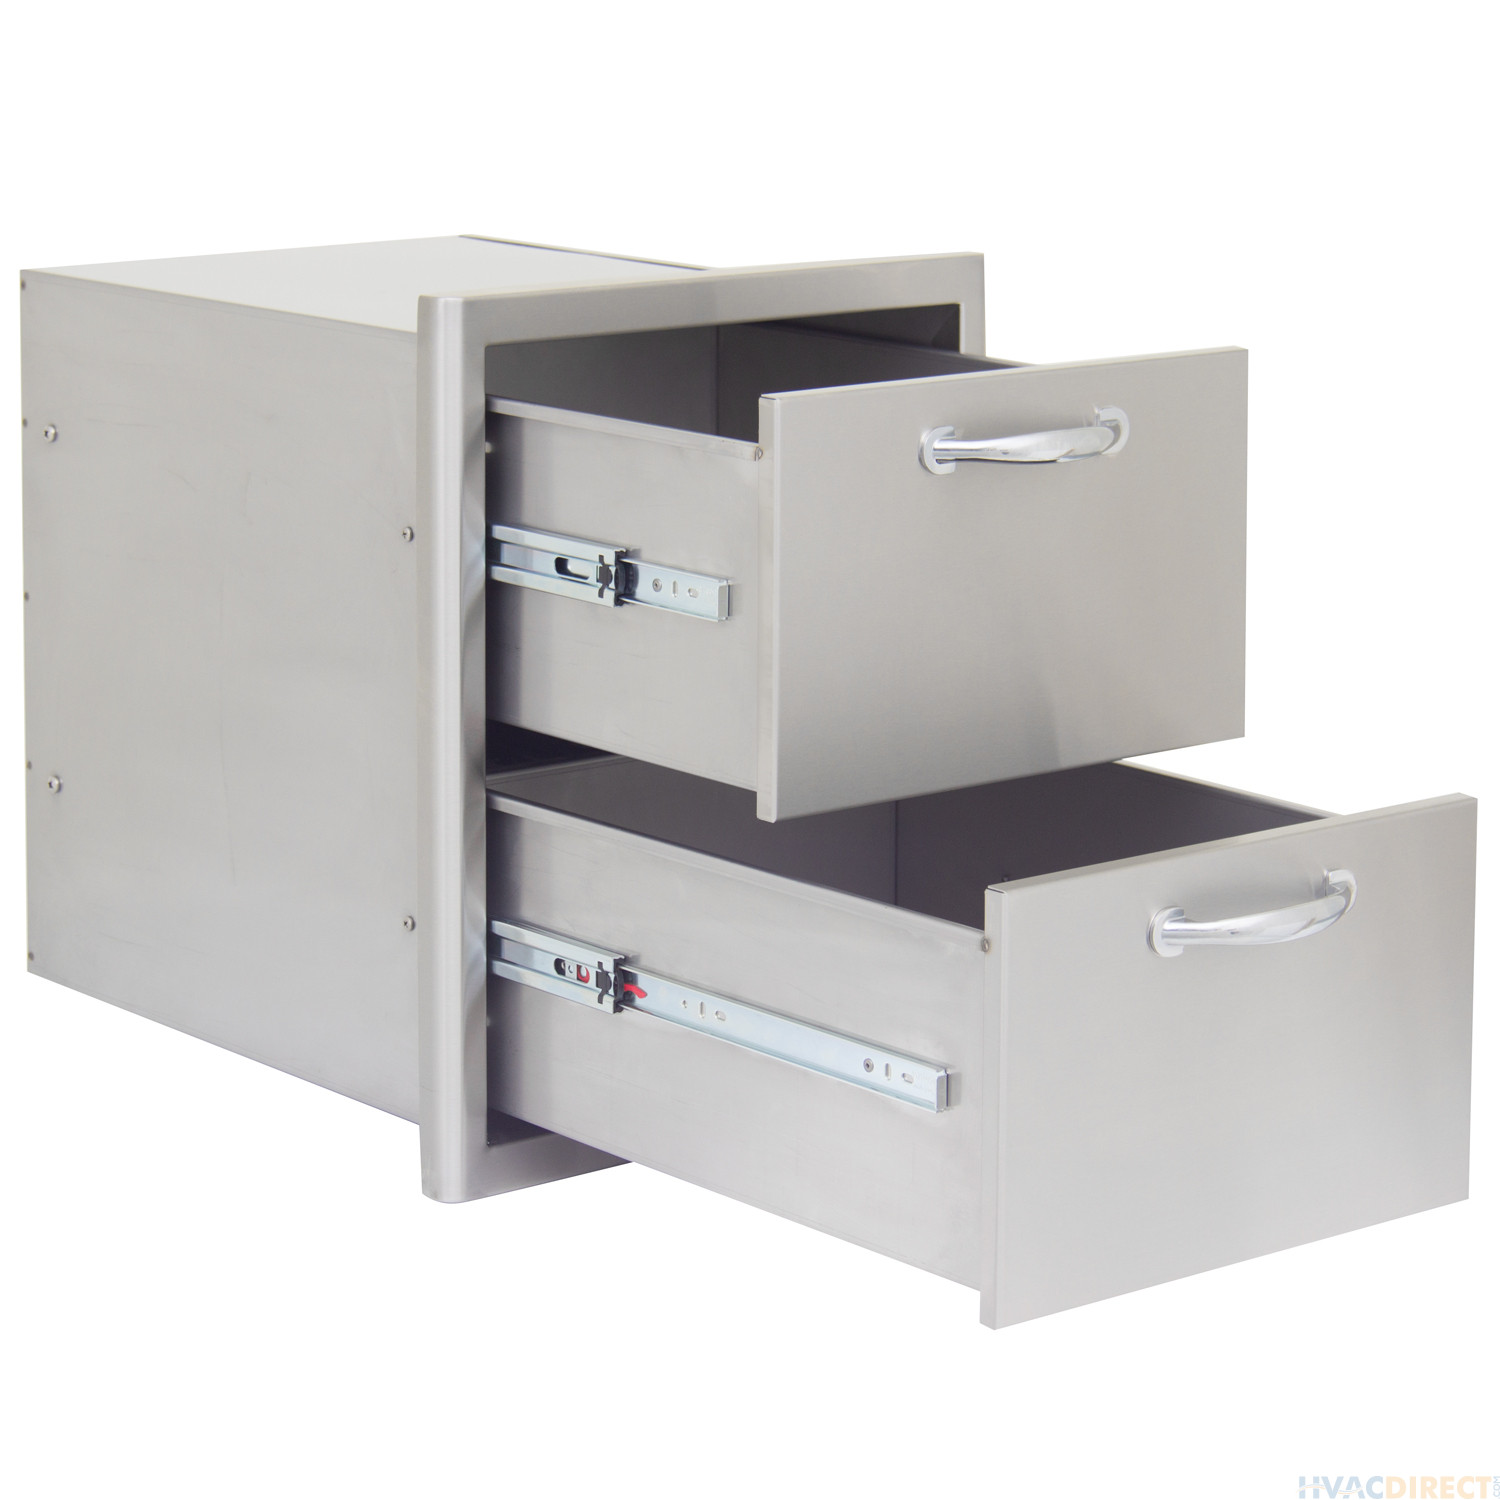 Blaze 16-Inch Stainless Steel Double Access Drawer - BLZ-DRW2-R